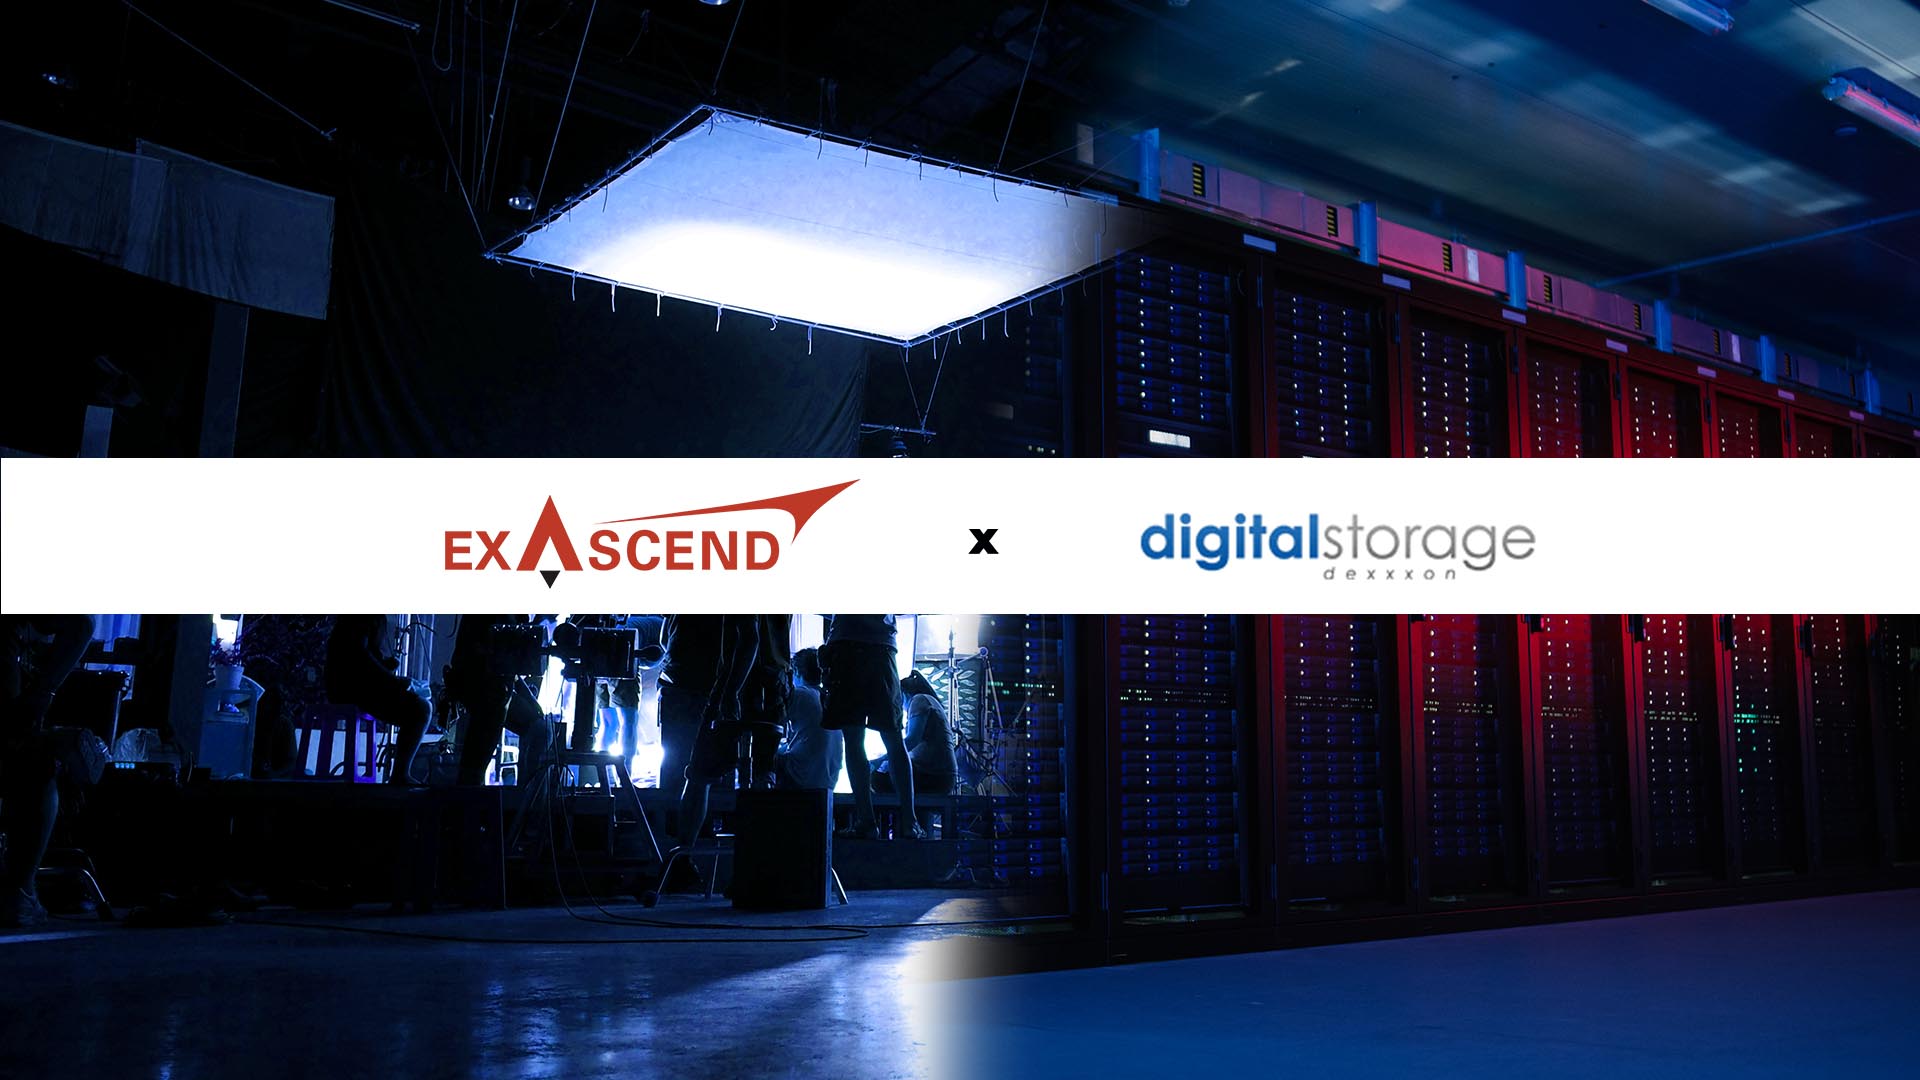 Image showcasing Exascend and Dexxxon Digital Storage's logo superimposed on a background made up by photos showcasing cinematography and enterprise applications.